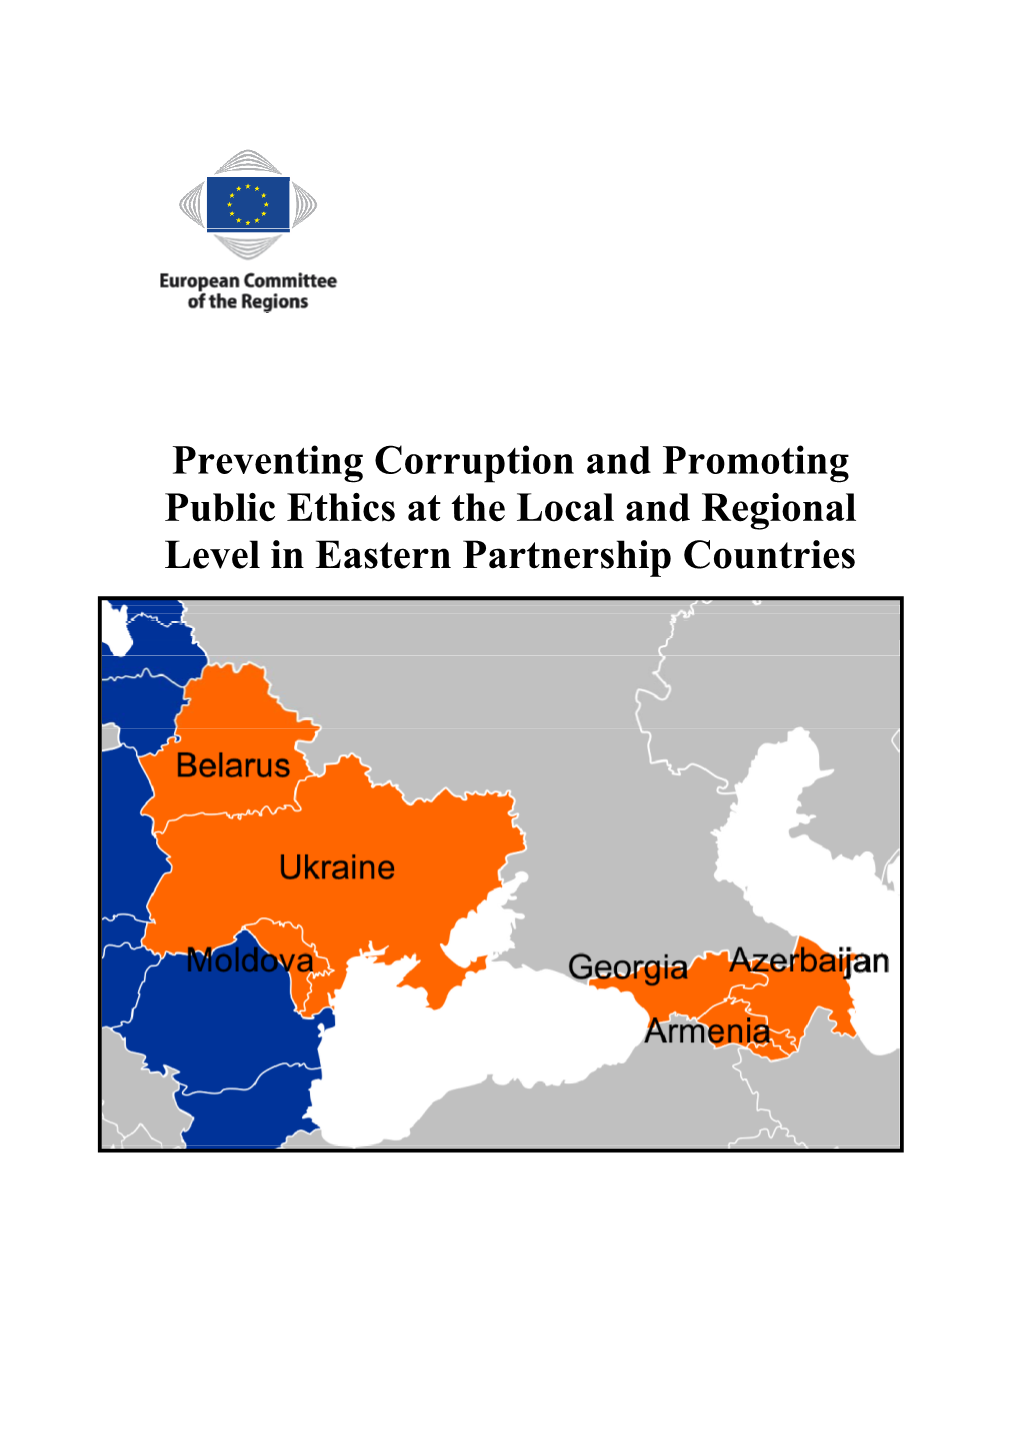 Preventing Corruption and Promoting Public Ethics at the Local and Regional Level in Eastern Partnership Countries